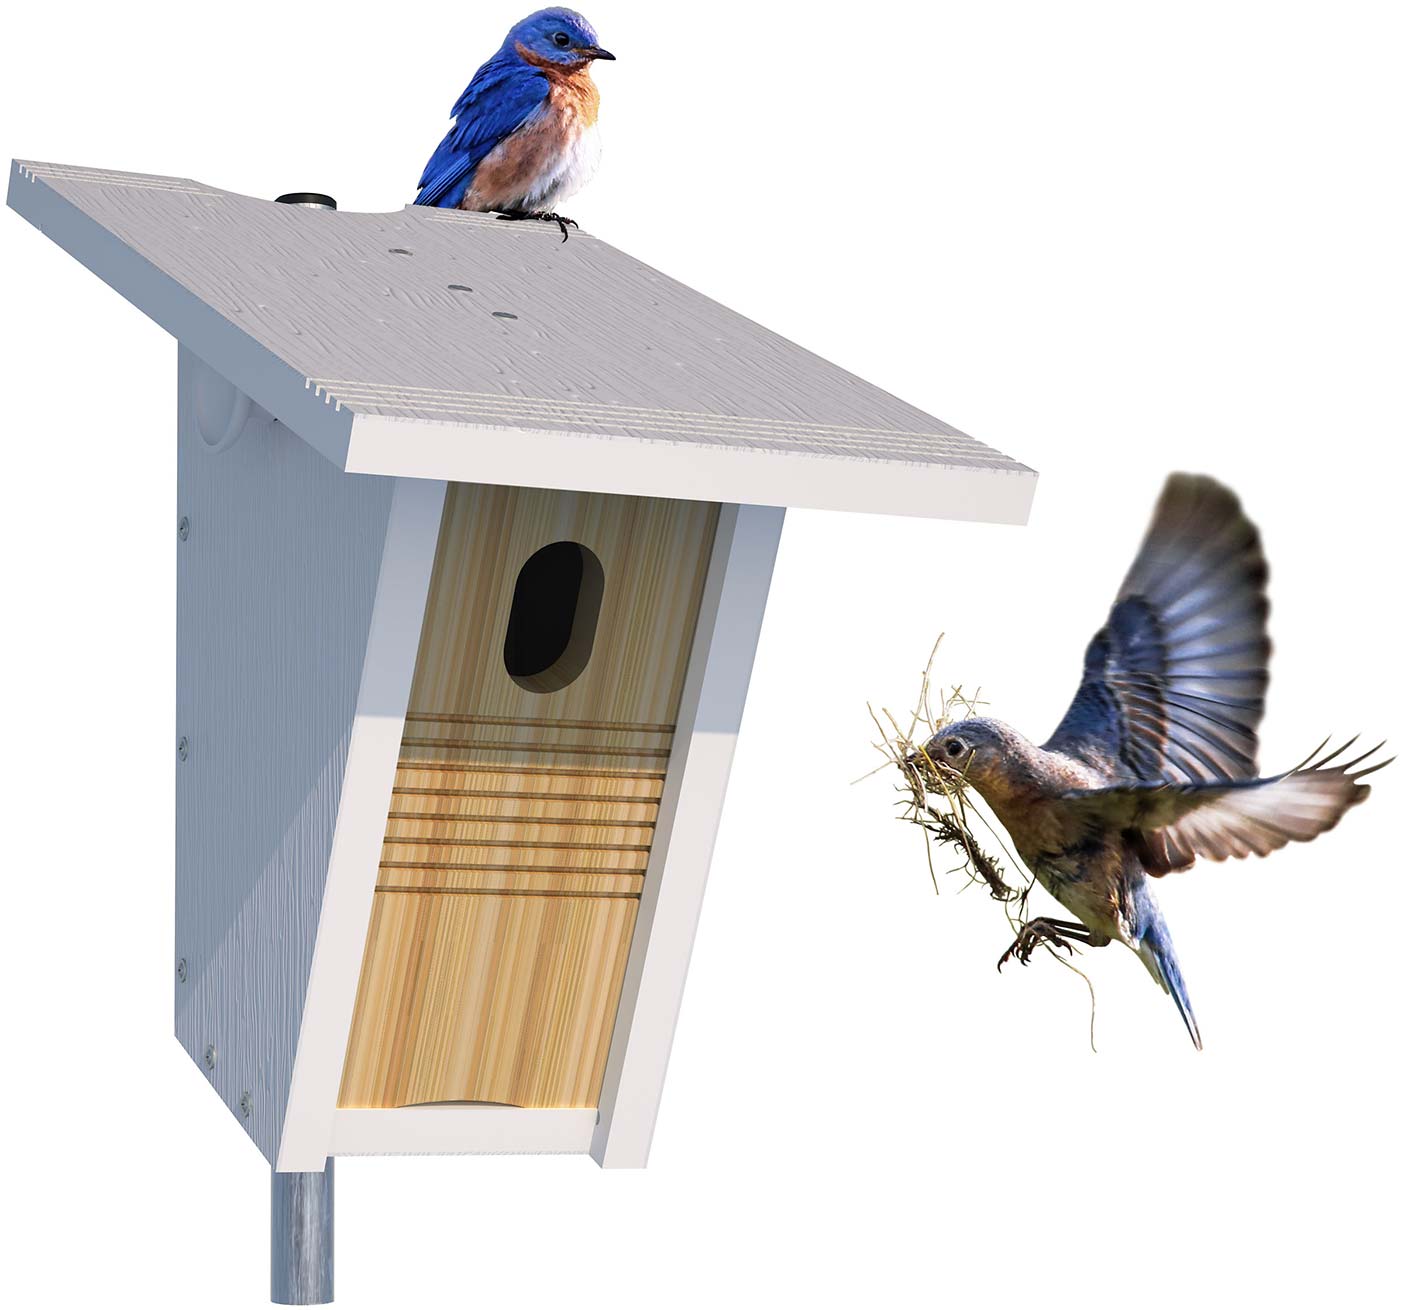 Image of bluebirds using a Star Prairie Nest Box — male perched on top and female entering cavity.